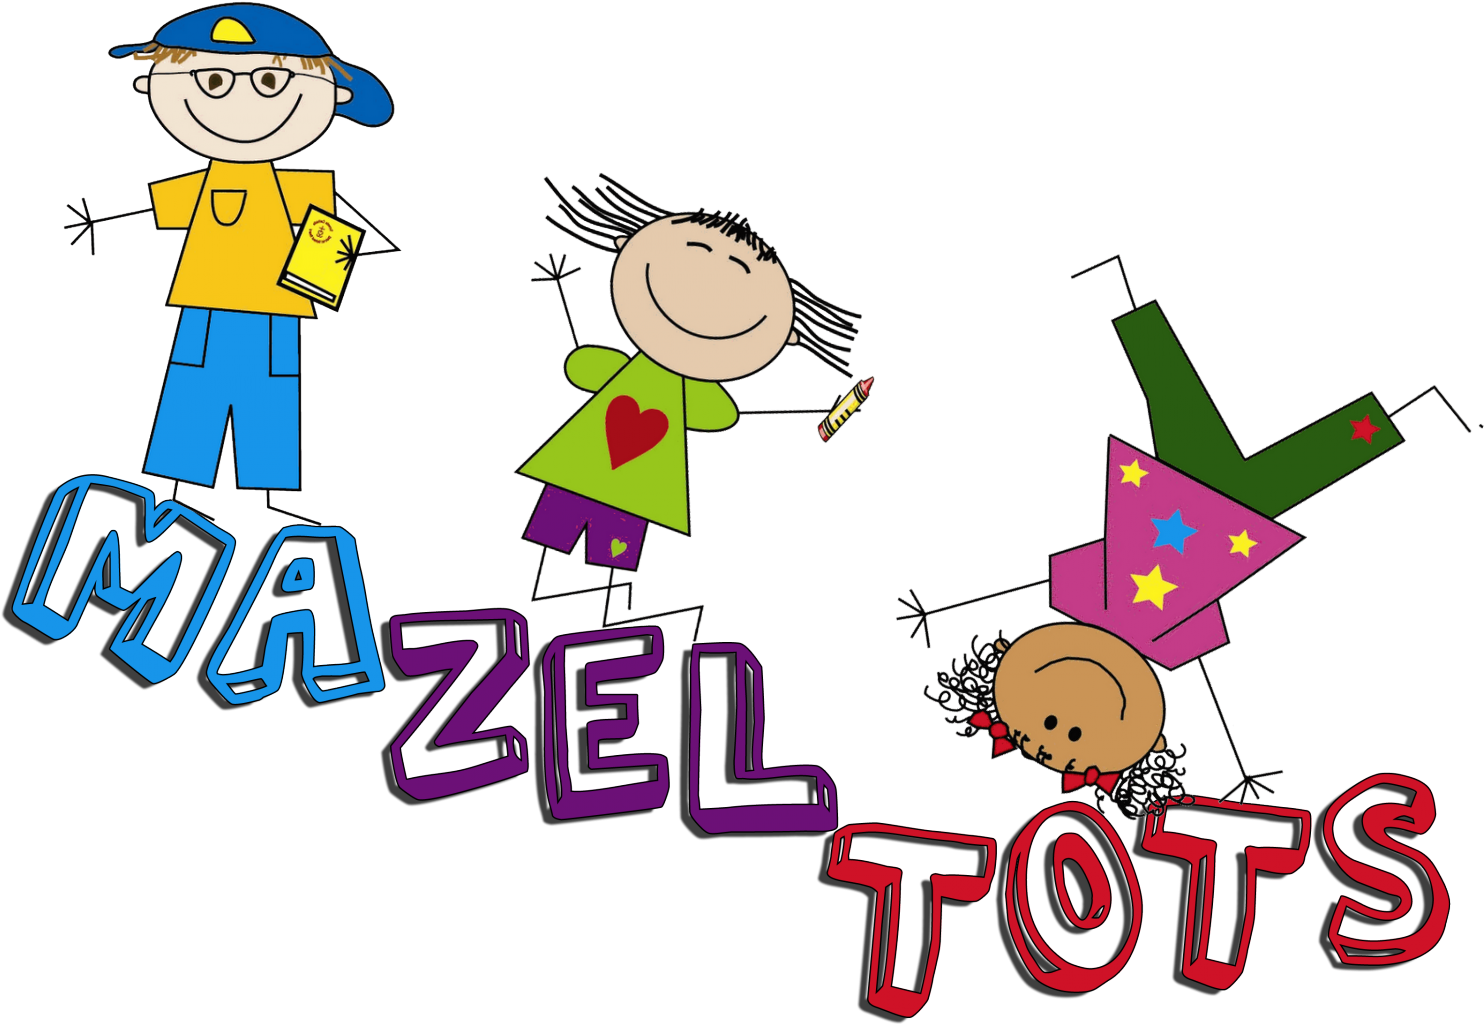 Mazel Tots Is Our All-new Shabbat Morning Experience - Play, Learn, Grow Together! Throw Blanket (1500x1114)